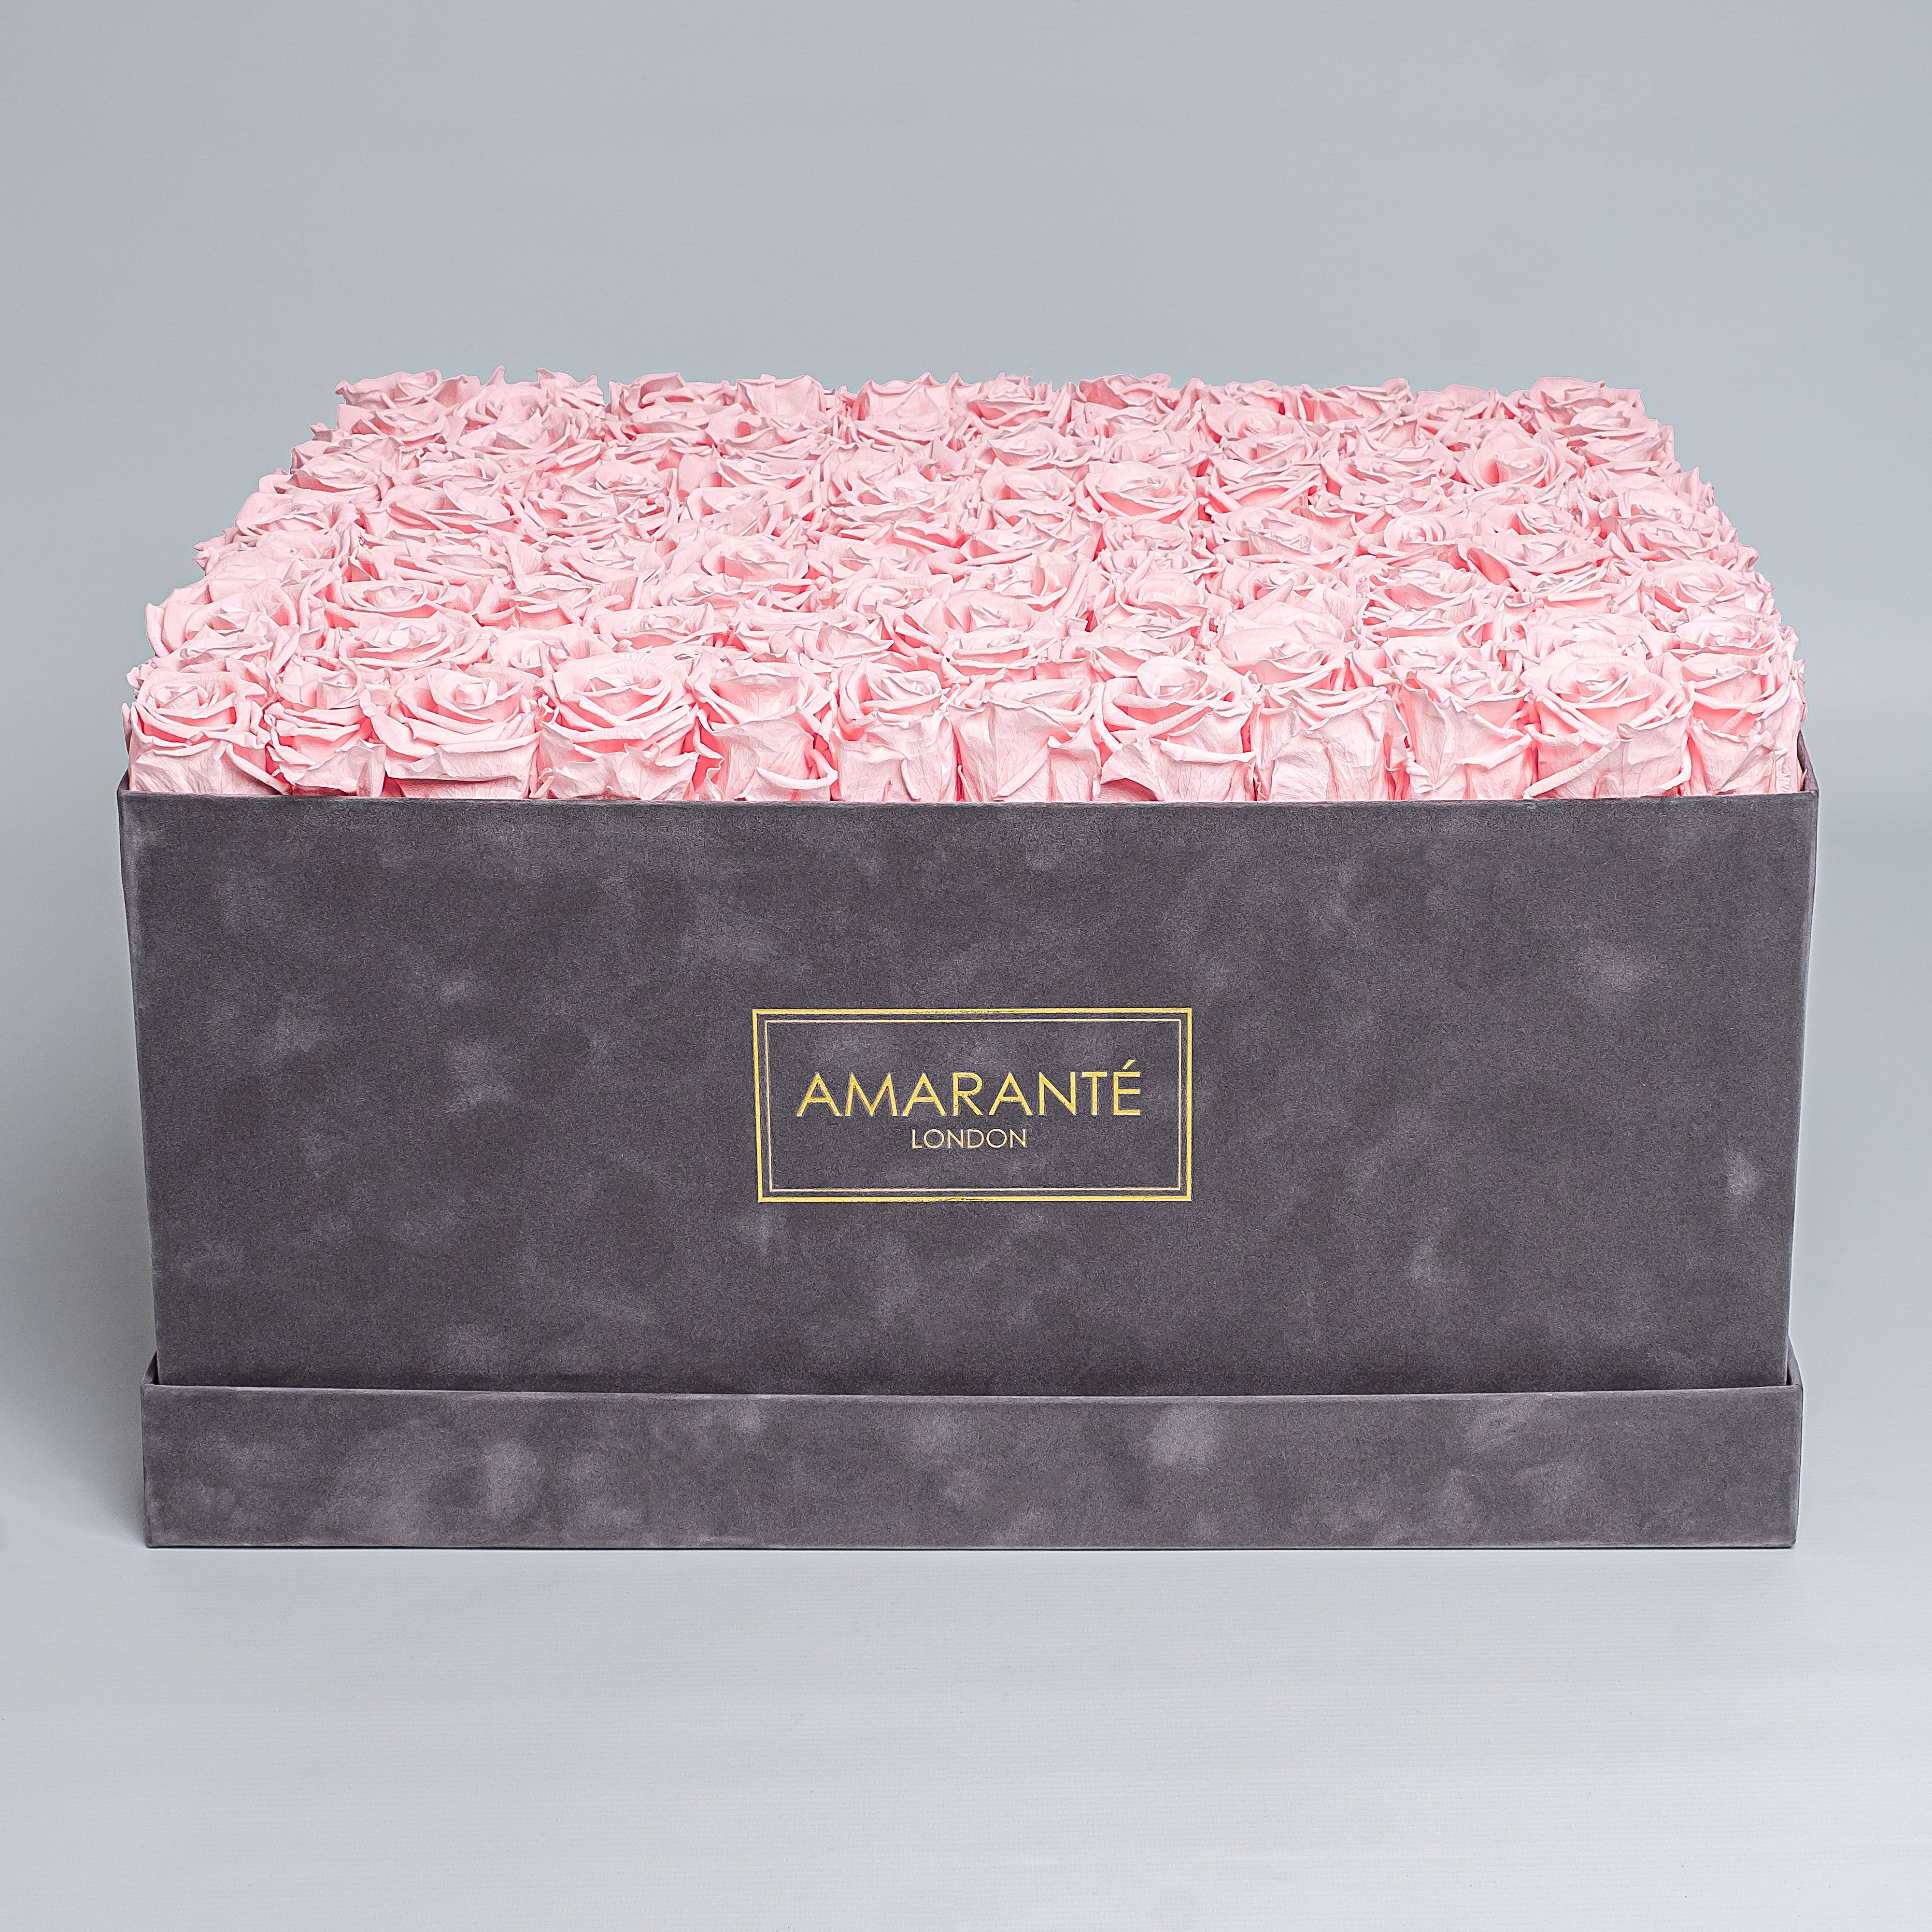 130-150 Roses in Super Deluxe Square Grey Suede Rose Box